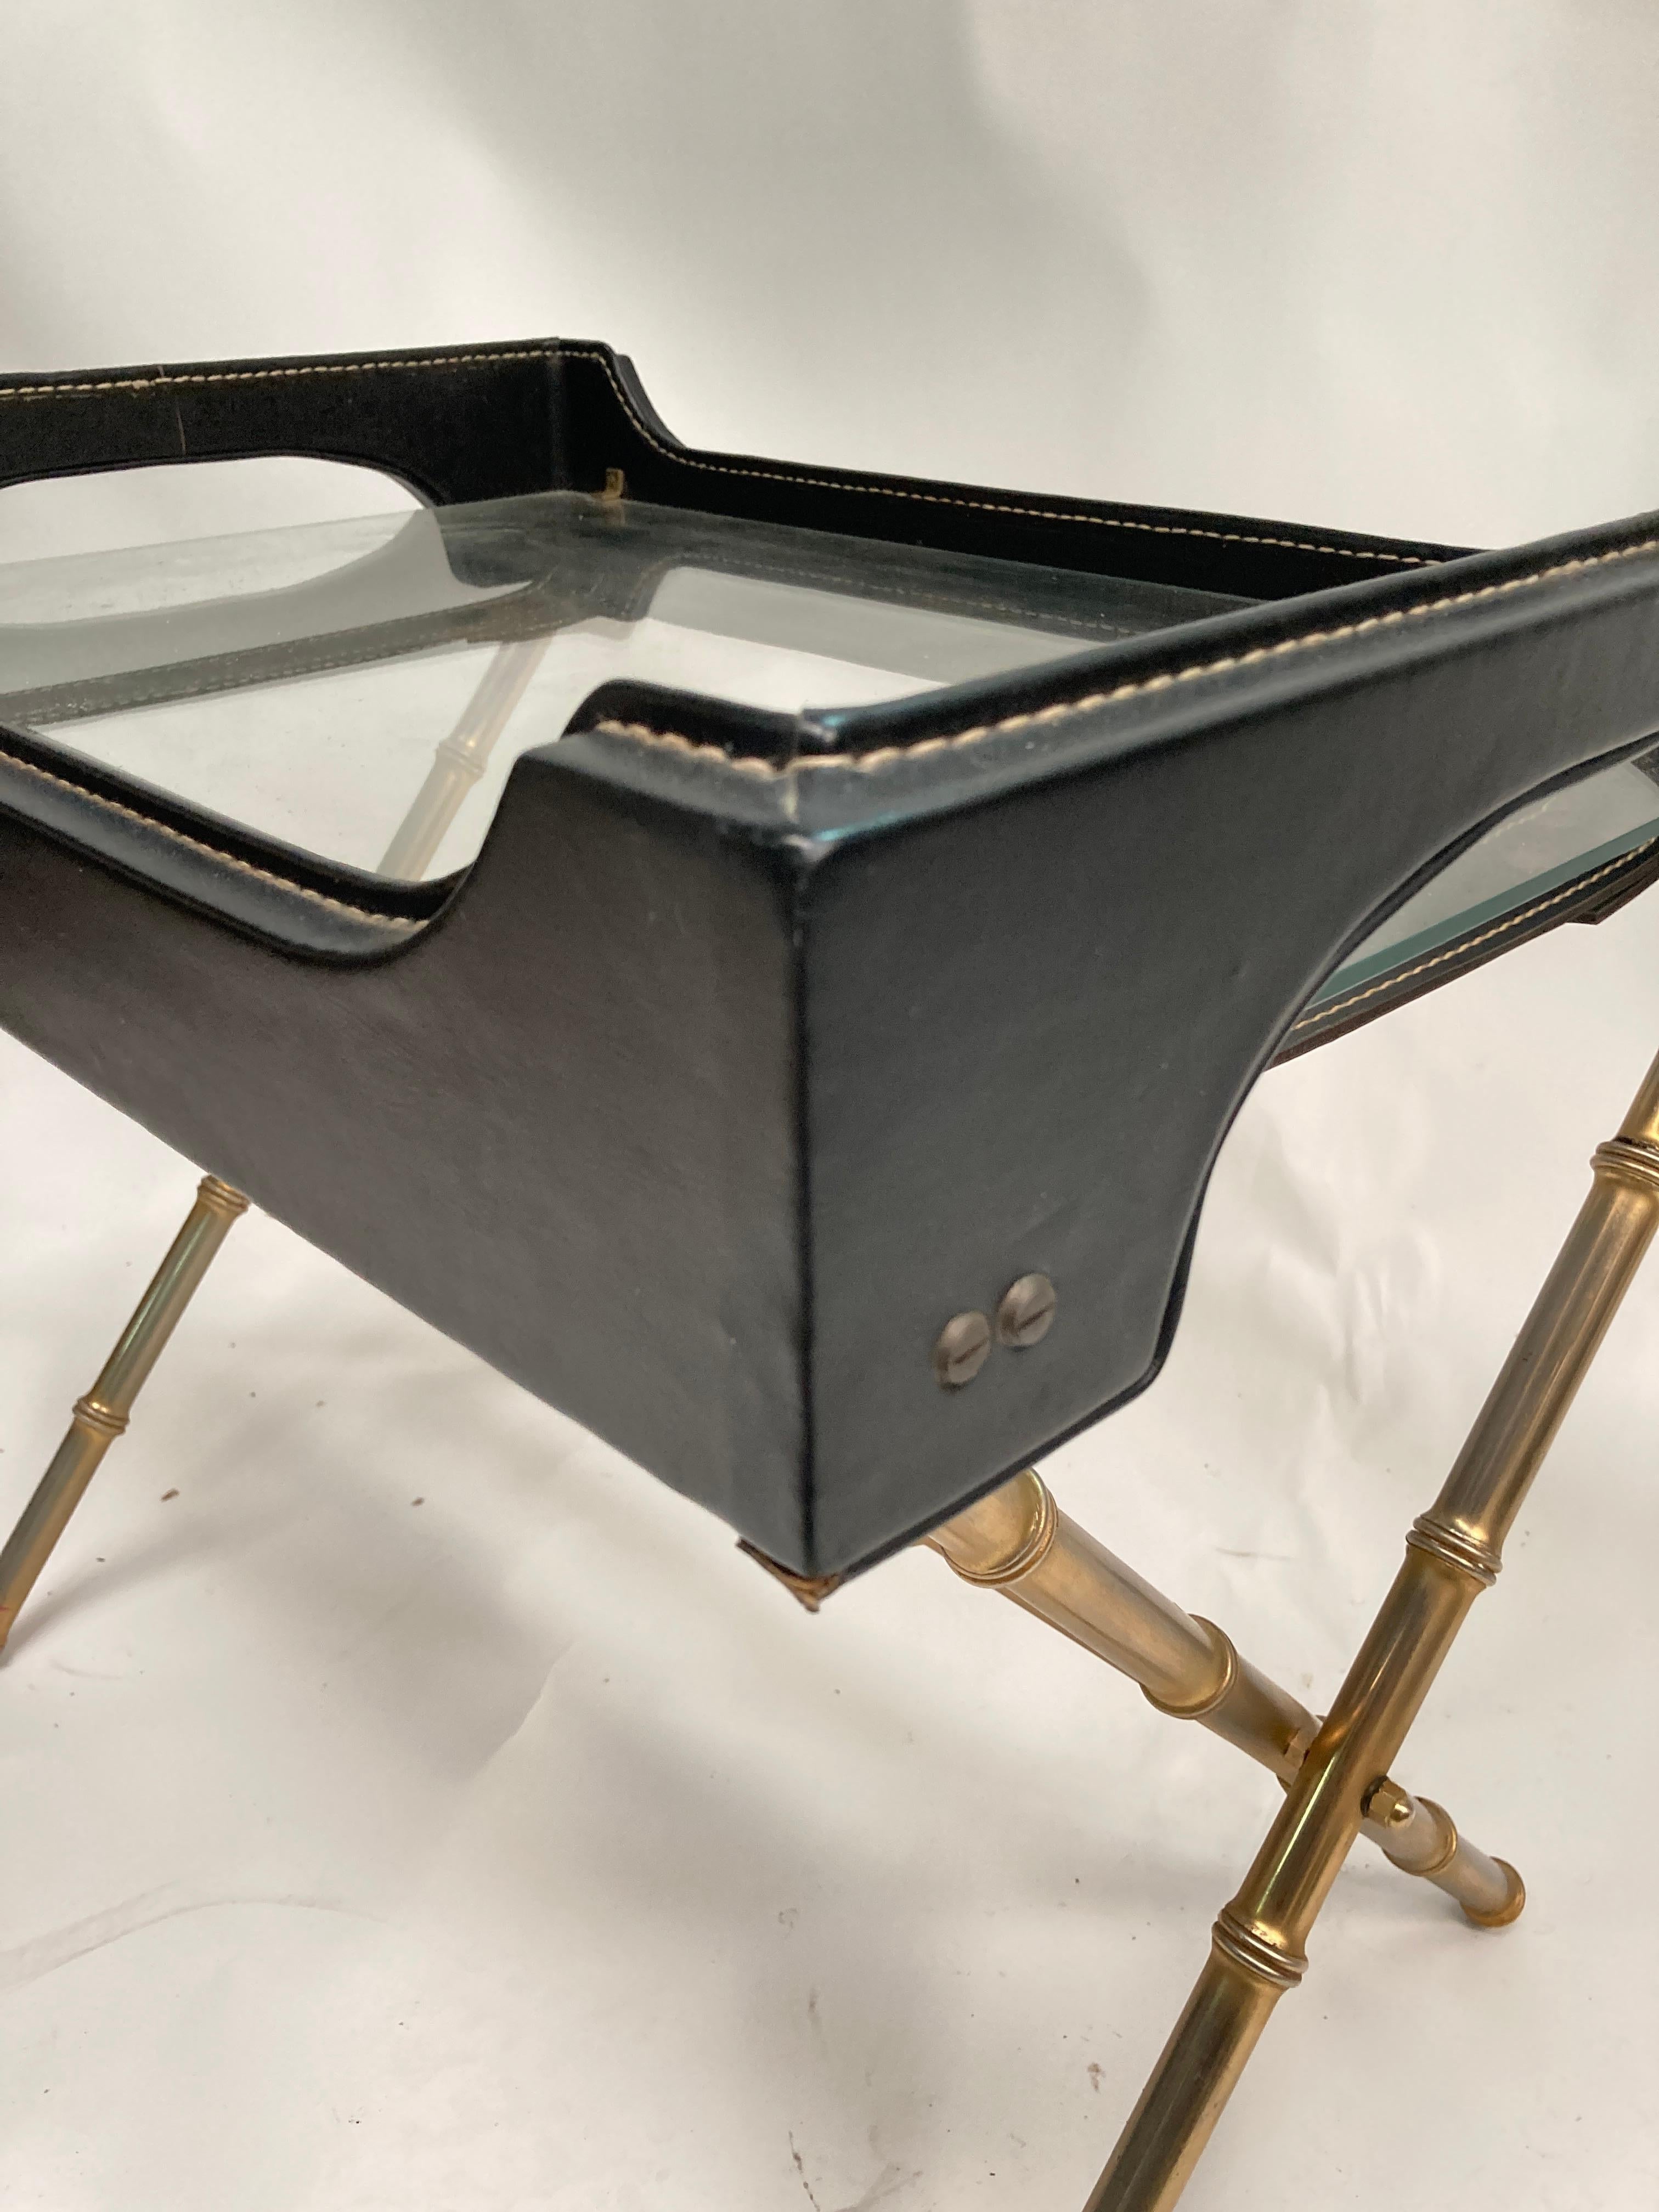 1950's Stitched leather cocktail table.
The top is a tray, the base can be folded
This piece is quiet rare complete on the market particularly in this condition